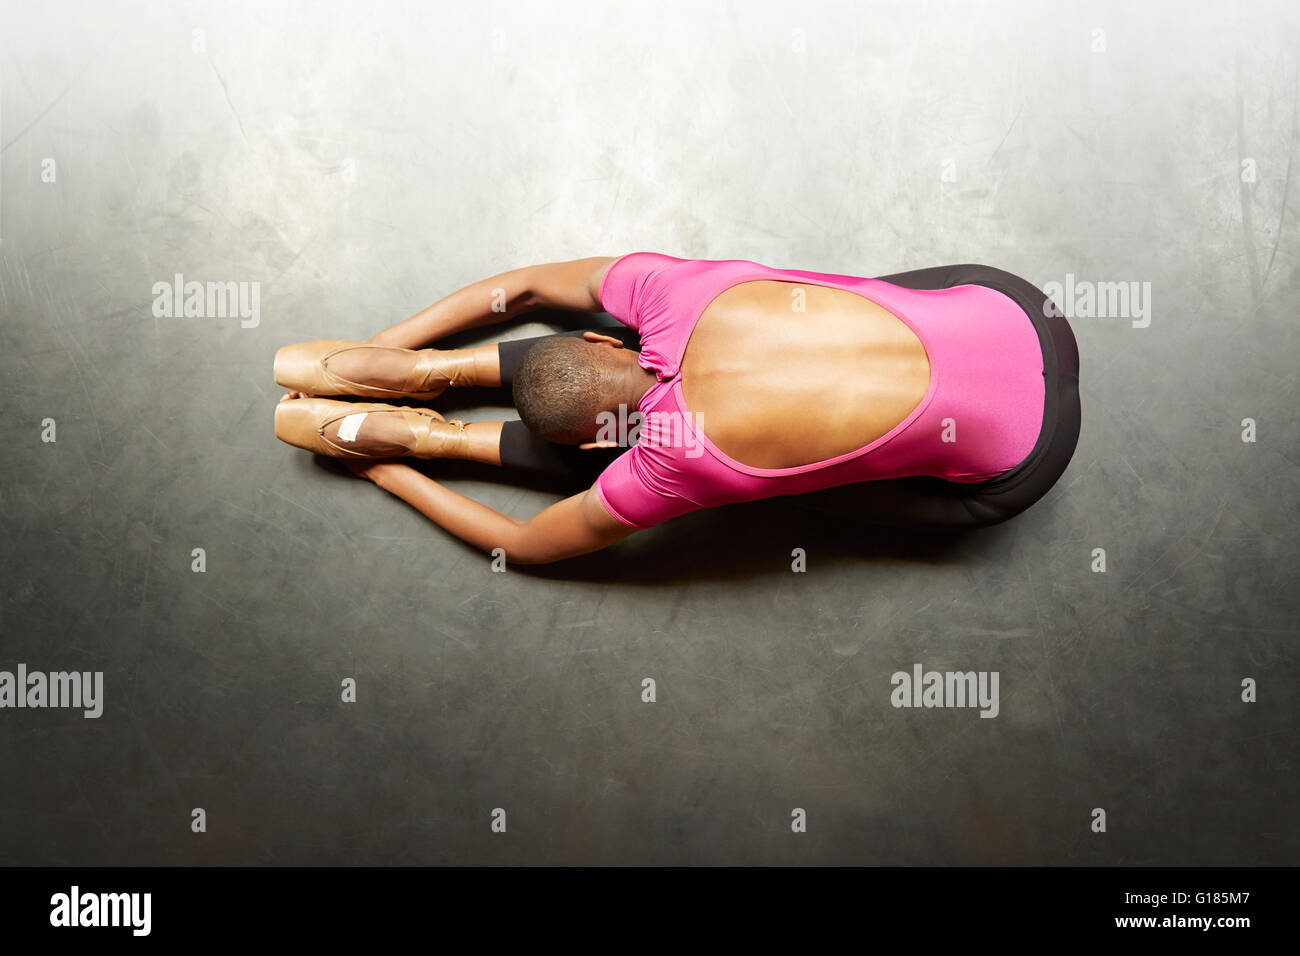 Ballet dancer doing stretching exercise Stock Photo